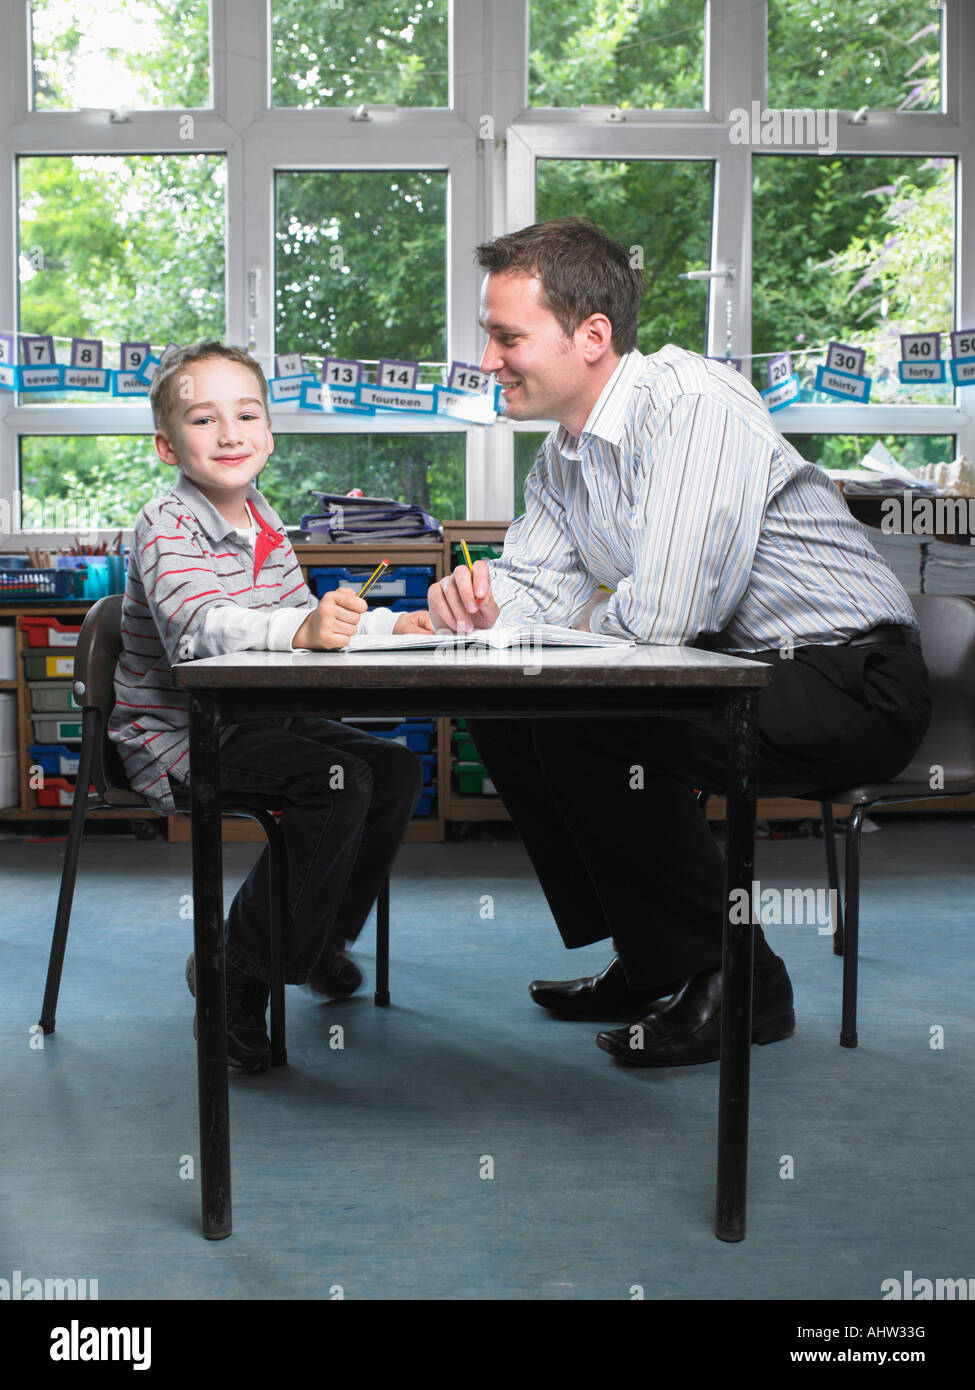 Male teacher helping young boy with work in classroom Stock Photo